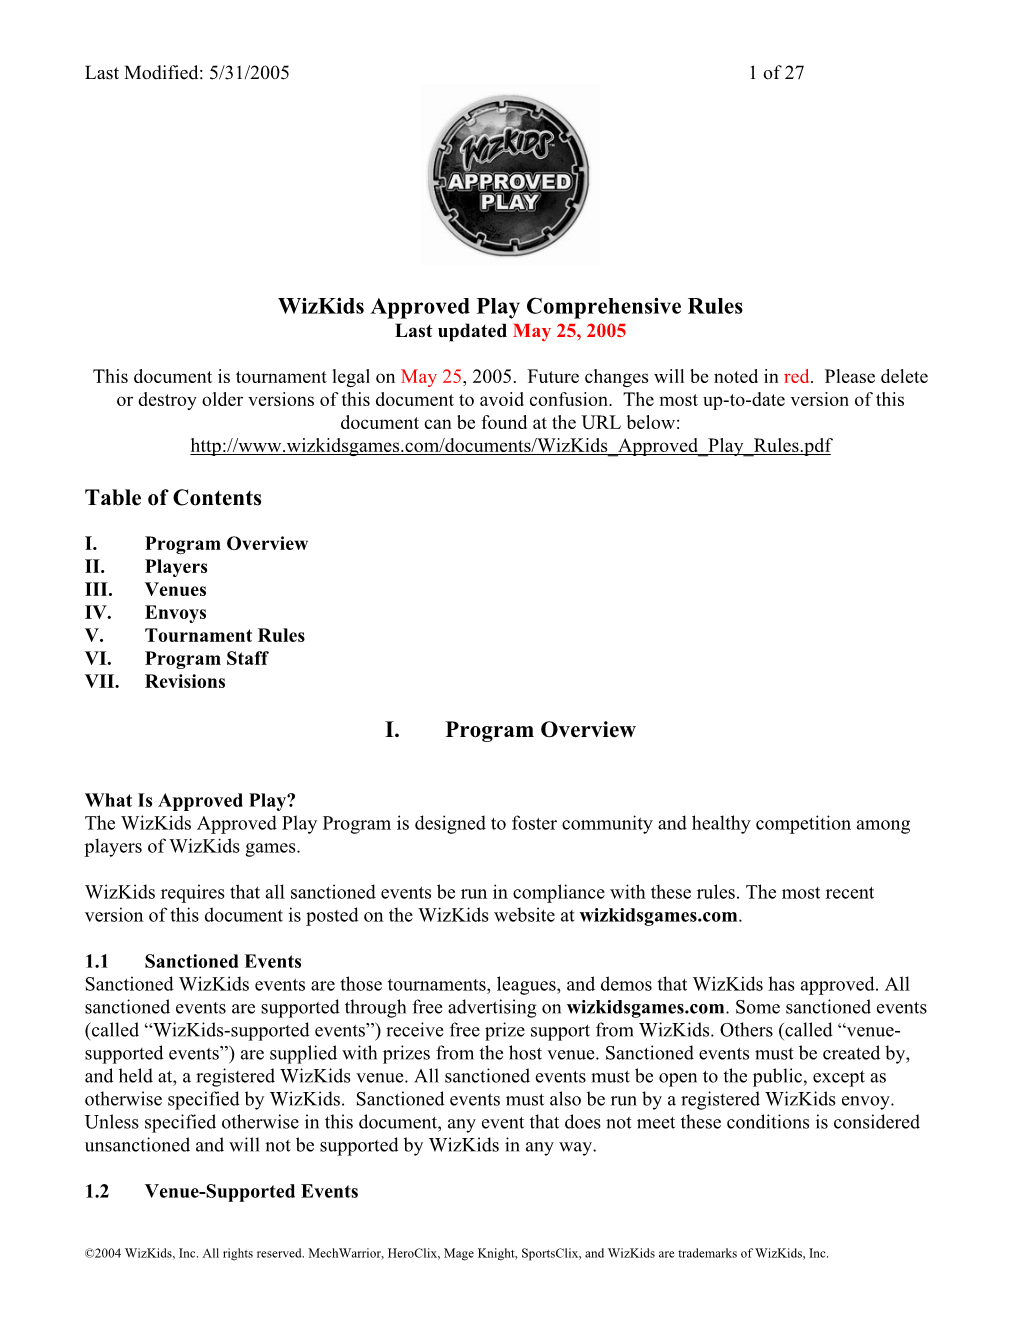 Wizkids Approved Play Comprehensive Rules Last Updated May 25, 2005